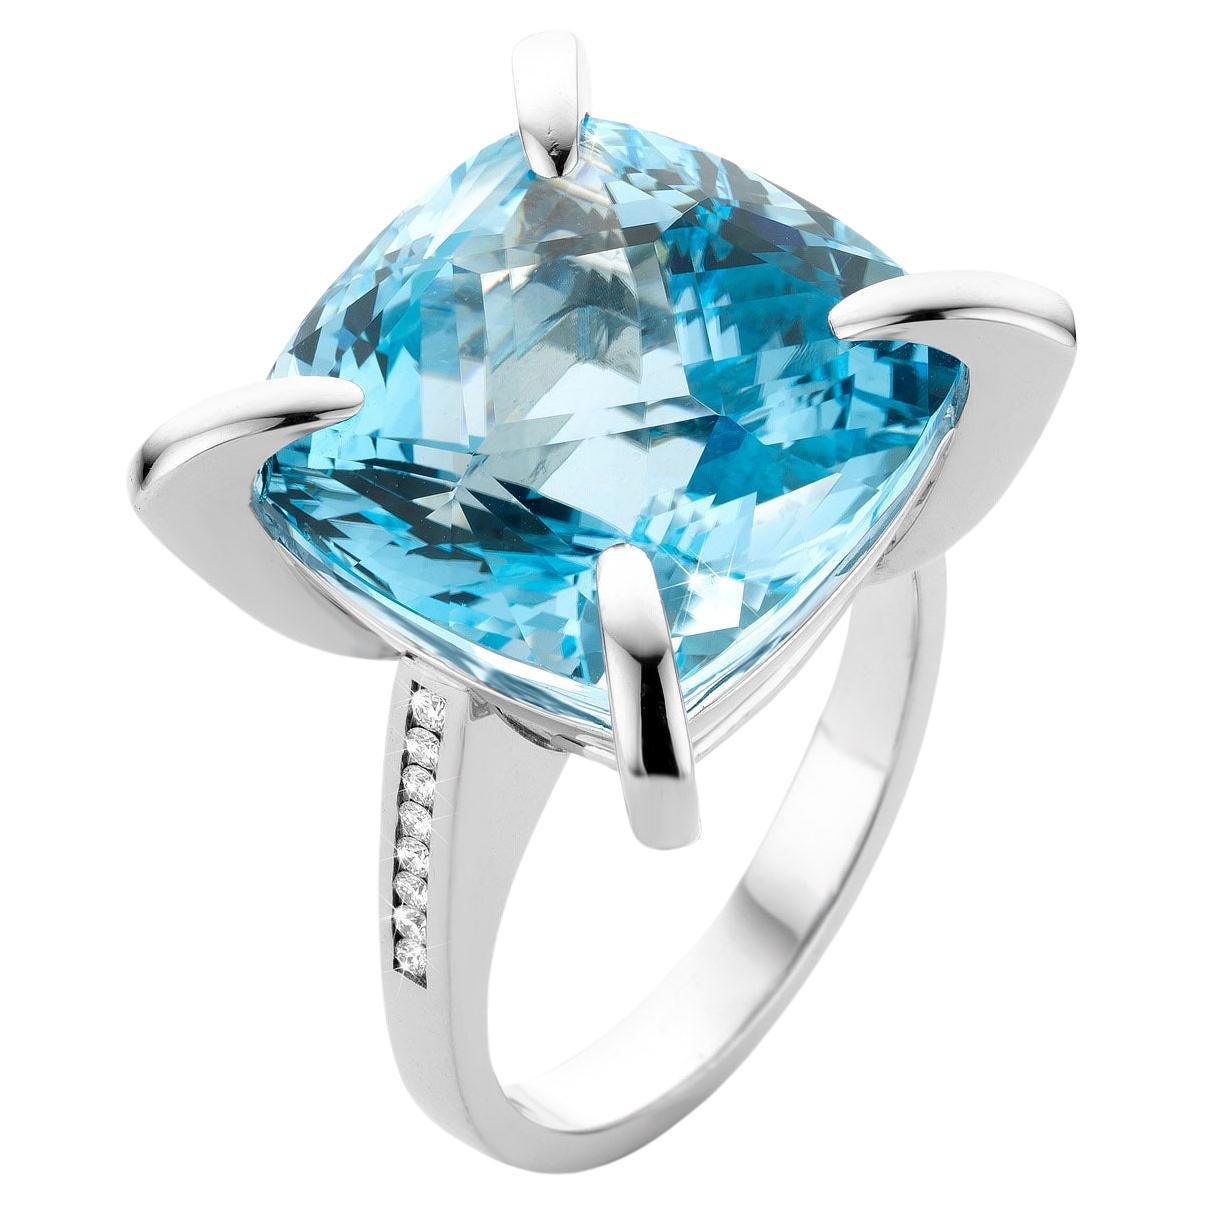 Fancy “Swiss Blue Statement” with Blue Topaz of 21.35 Carat and Diamonds Ring 